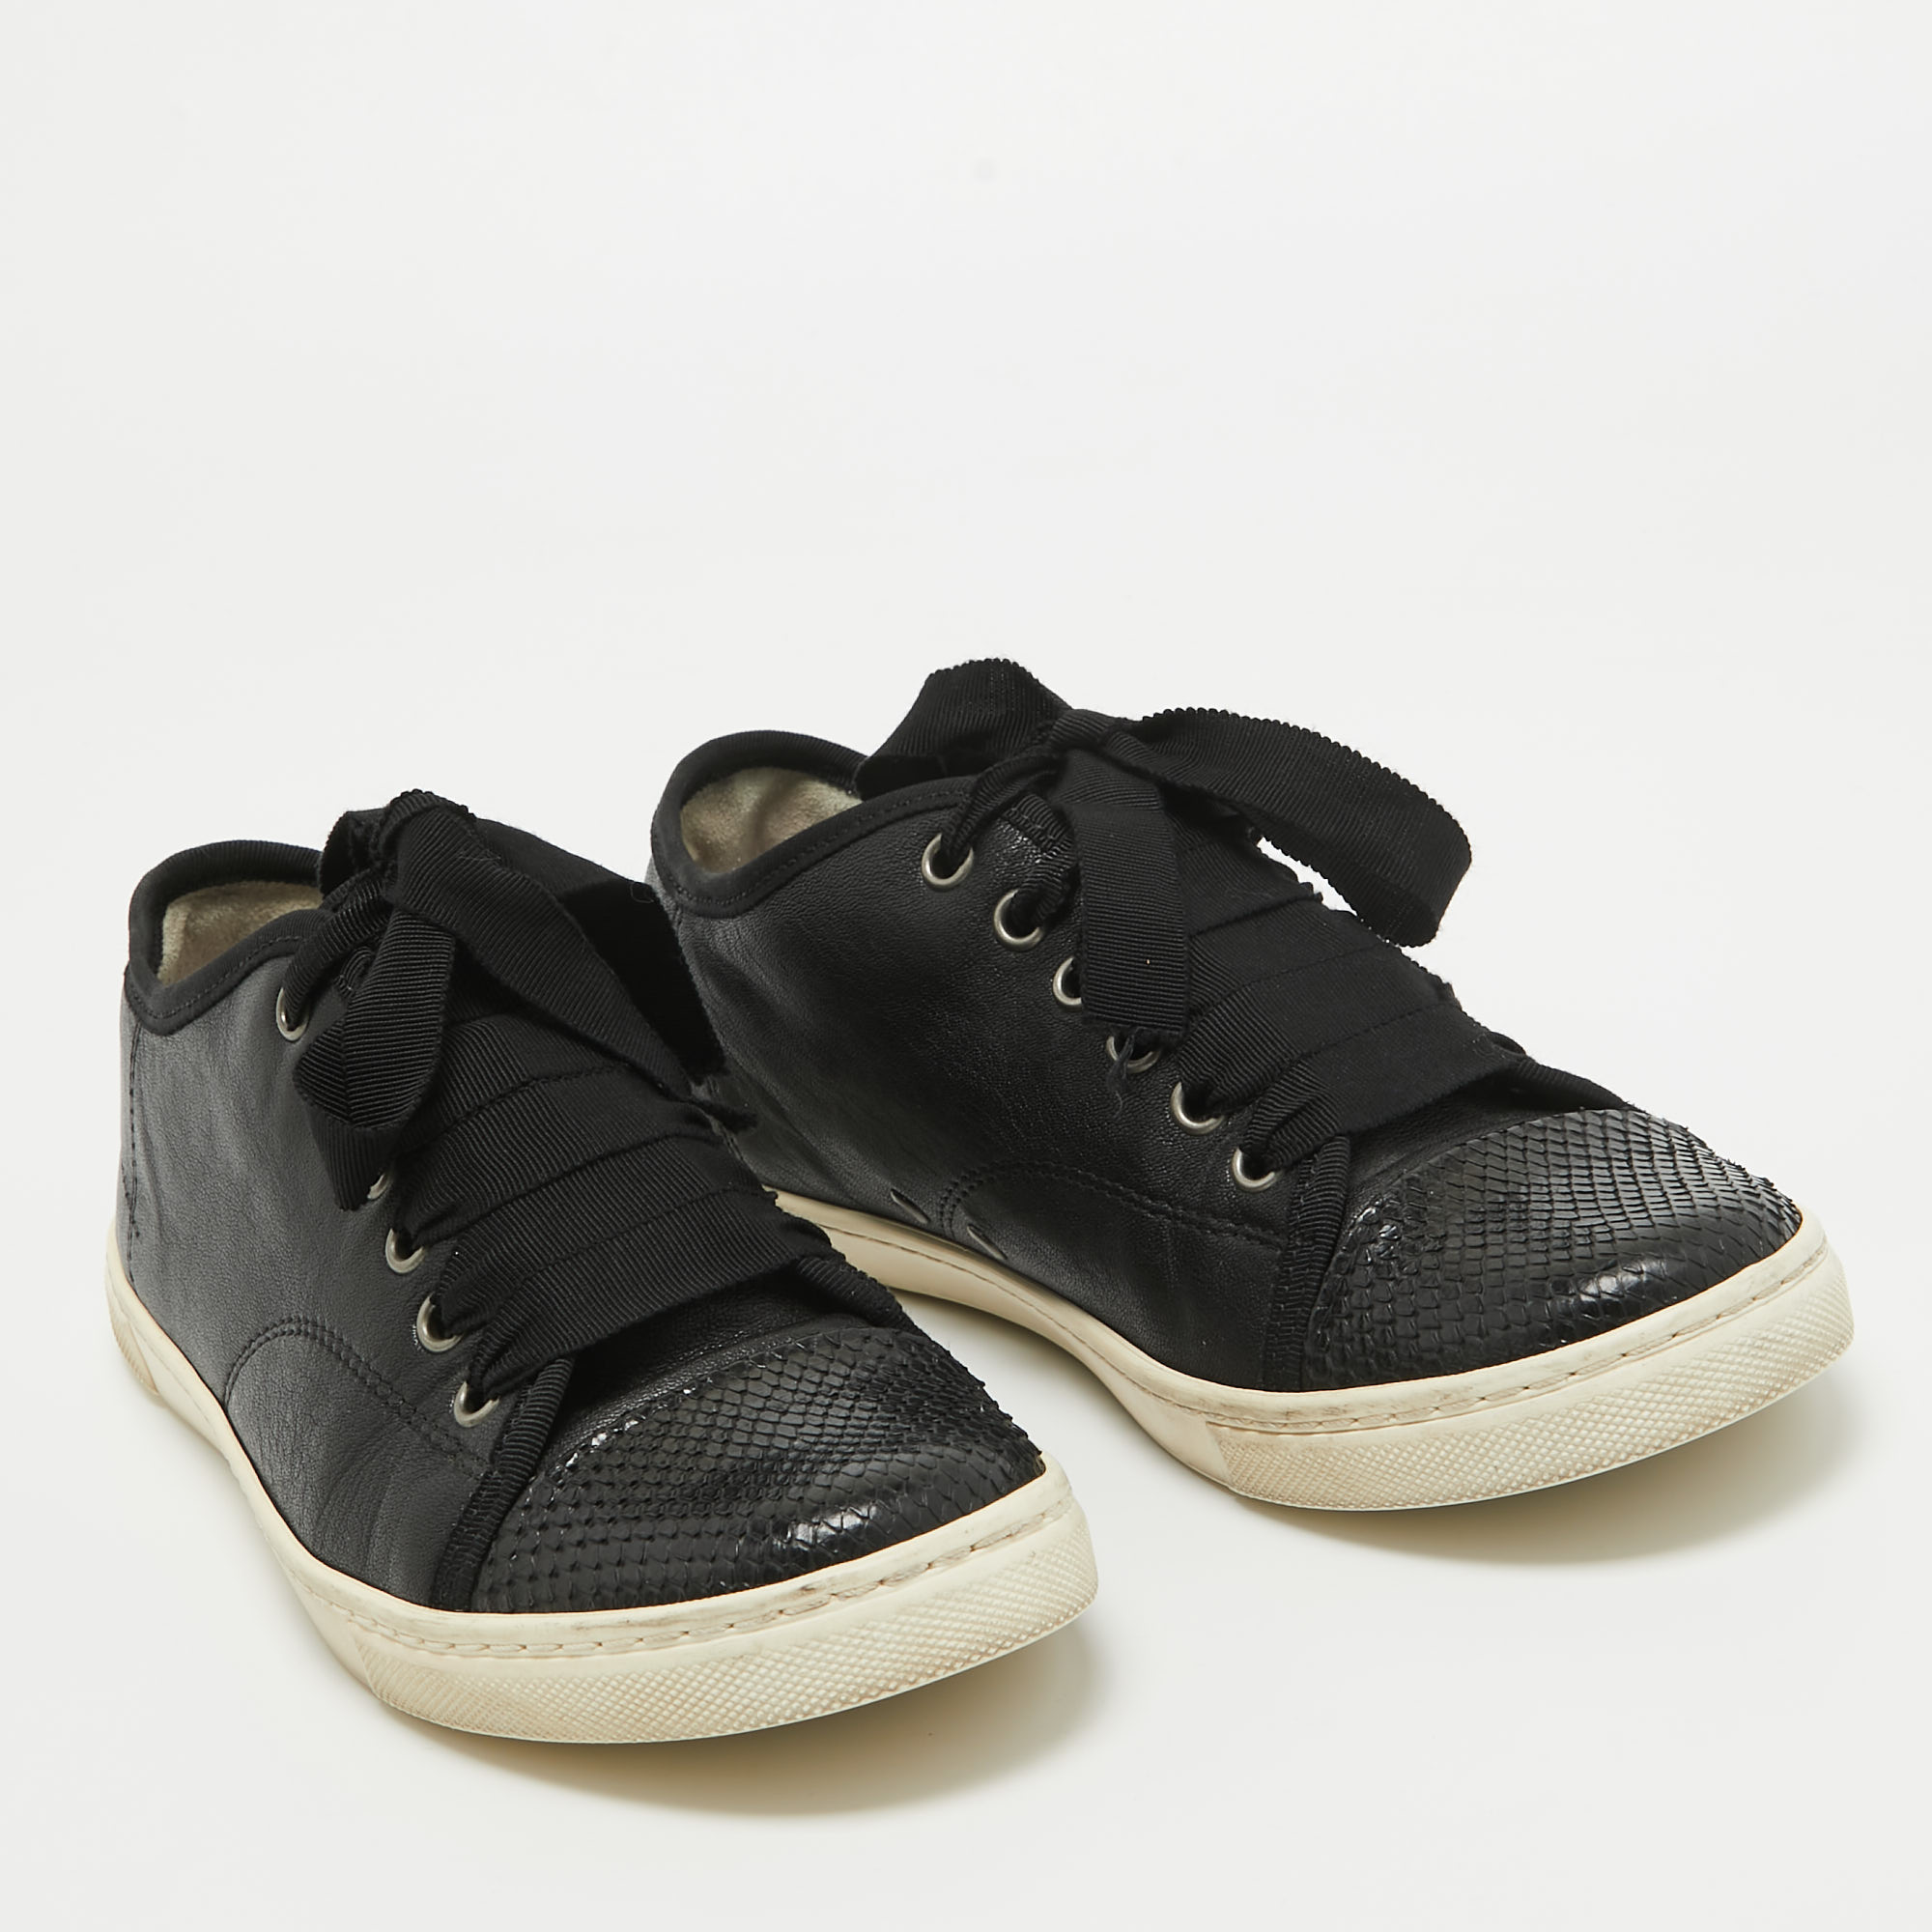 Lanvin Black Leather And Snakeskin Cap Toe Low Top Sneakers Size 37